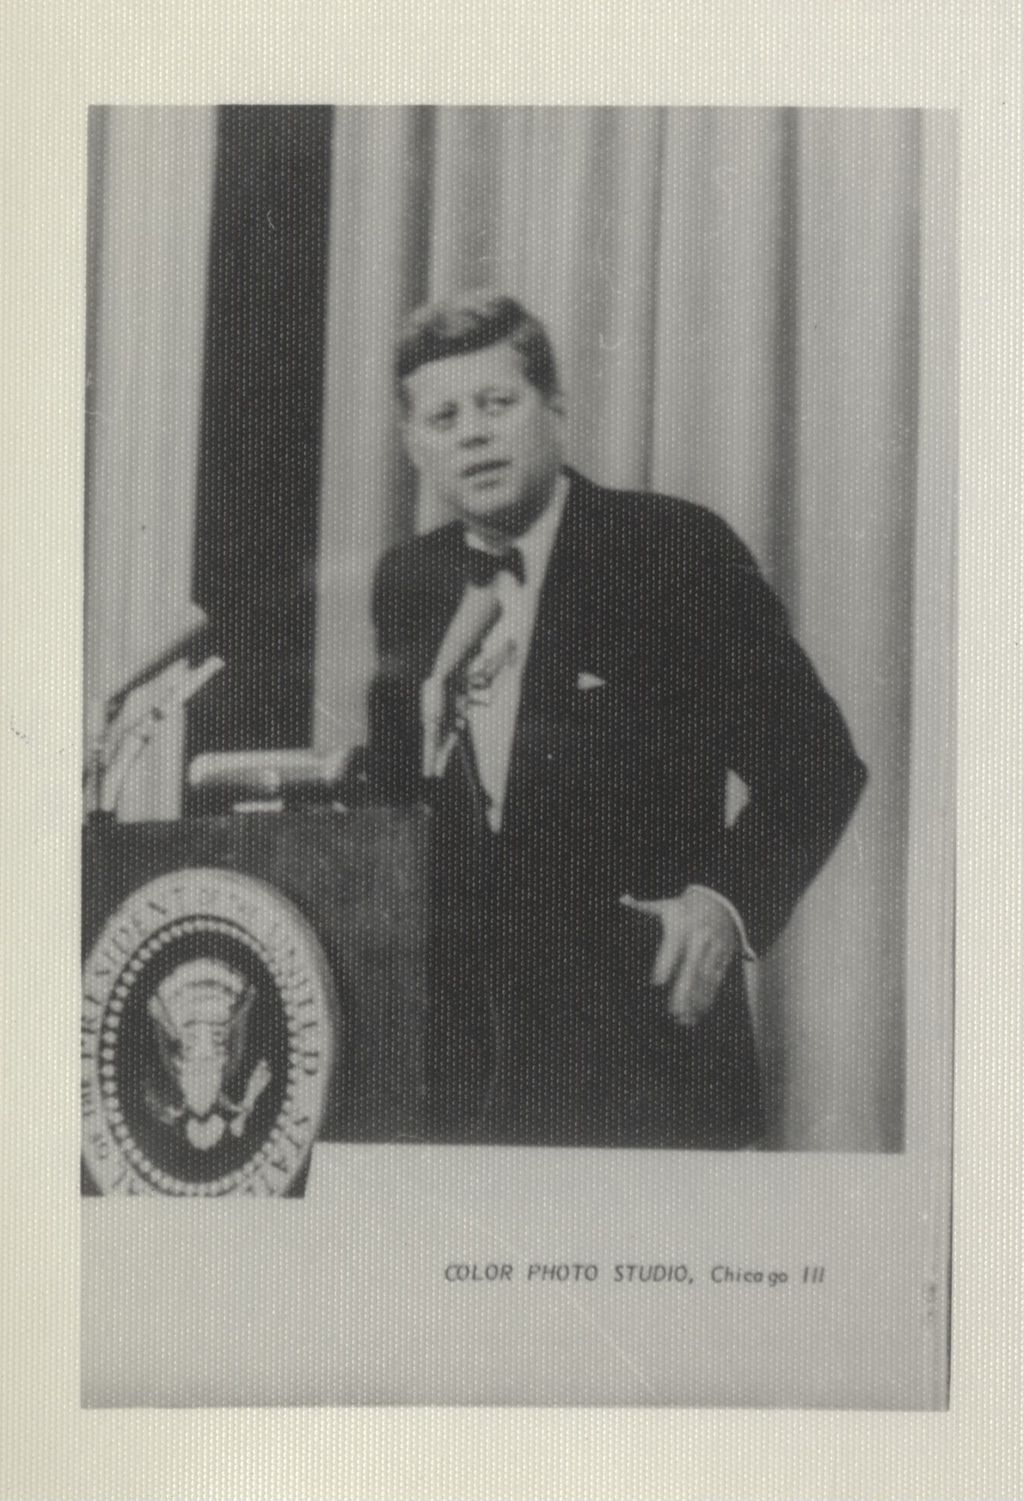 John F. Kennedy speaking at a 1962 Democratic Party dinner in Chicago